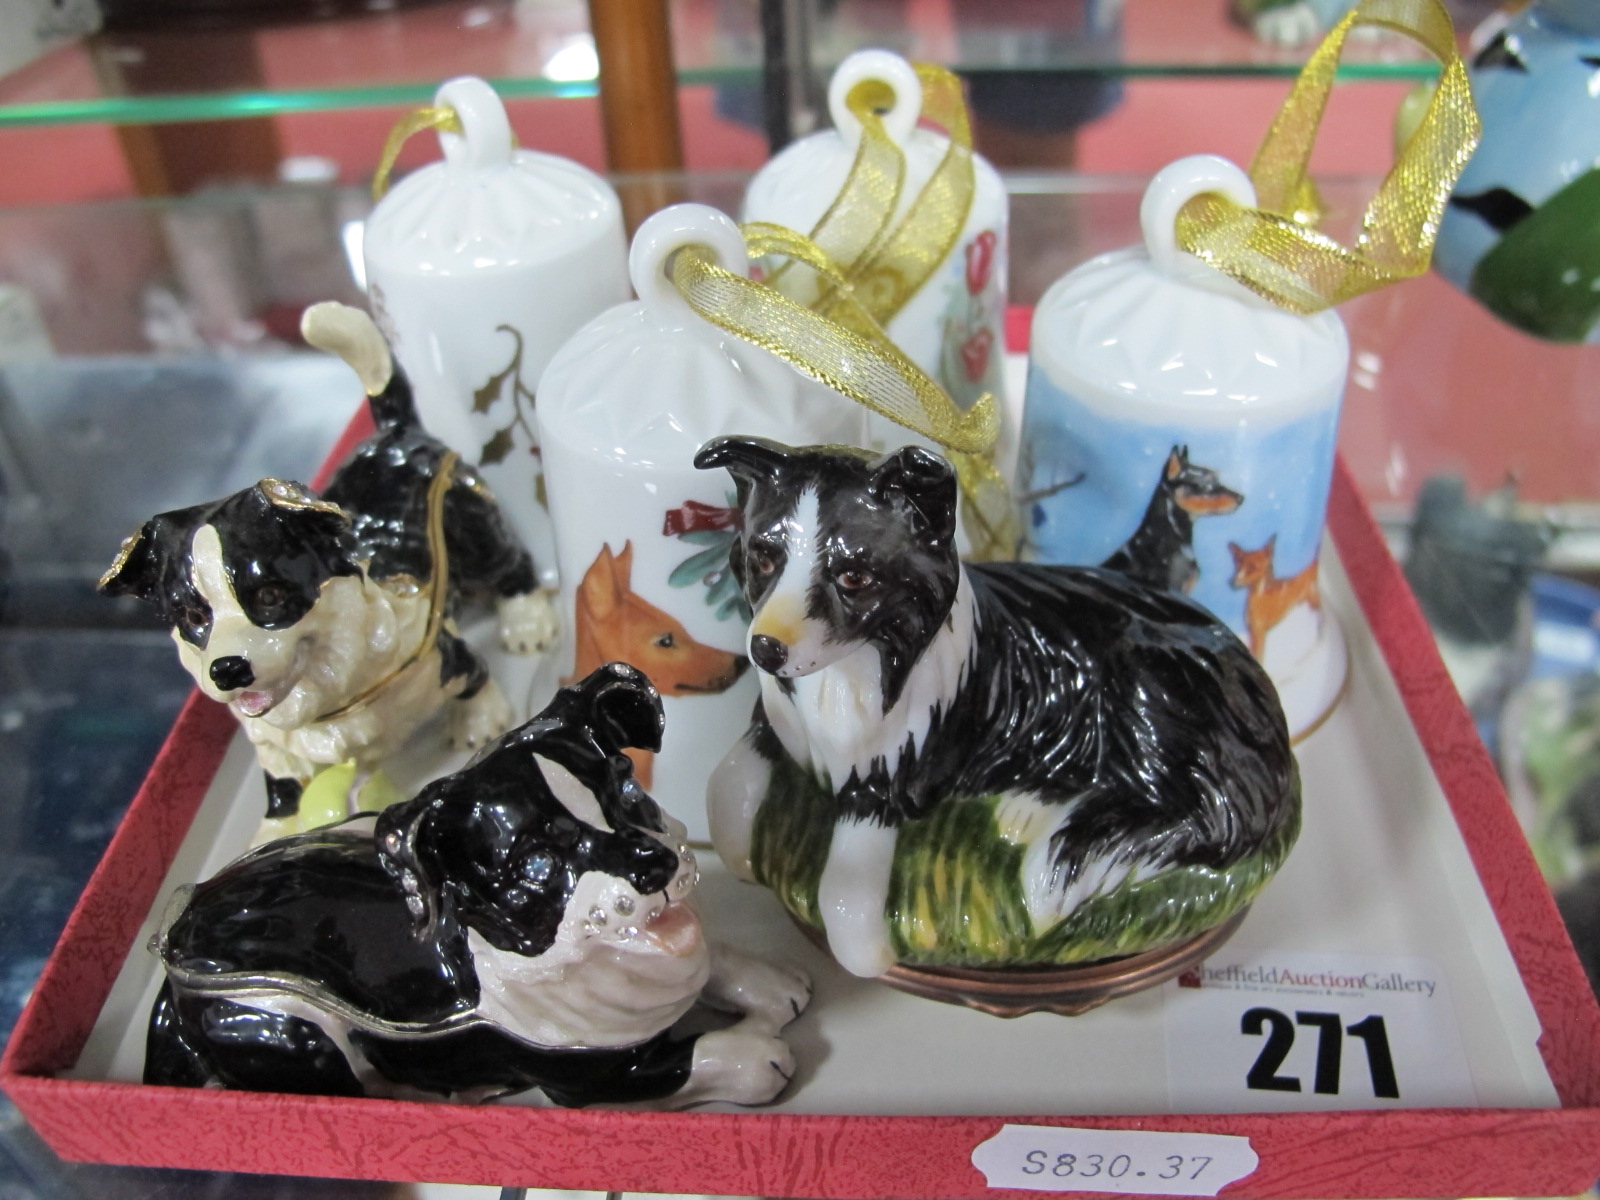 Halcyon Days Border Collie Trinket Box; together with two bonbonnieres featuring dogs and Marissa